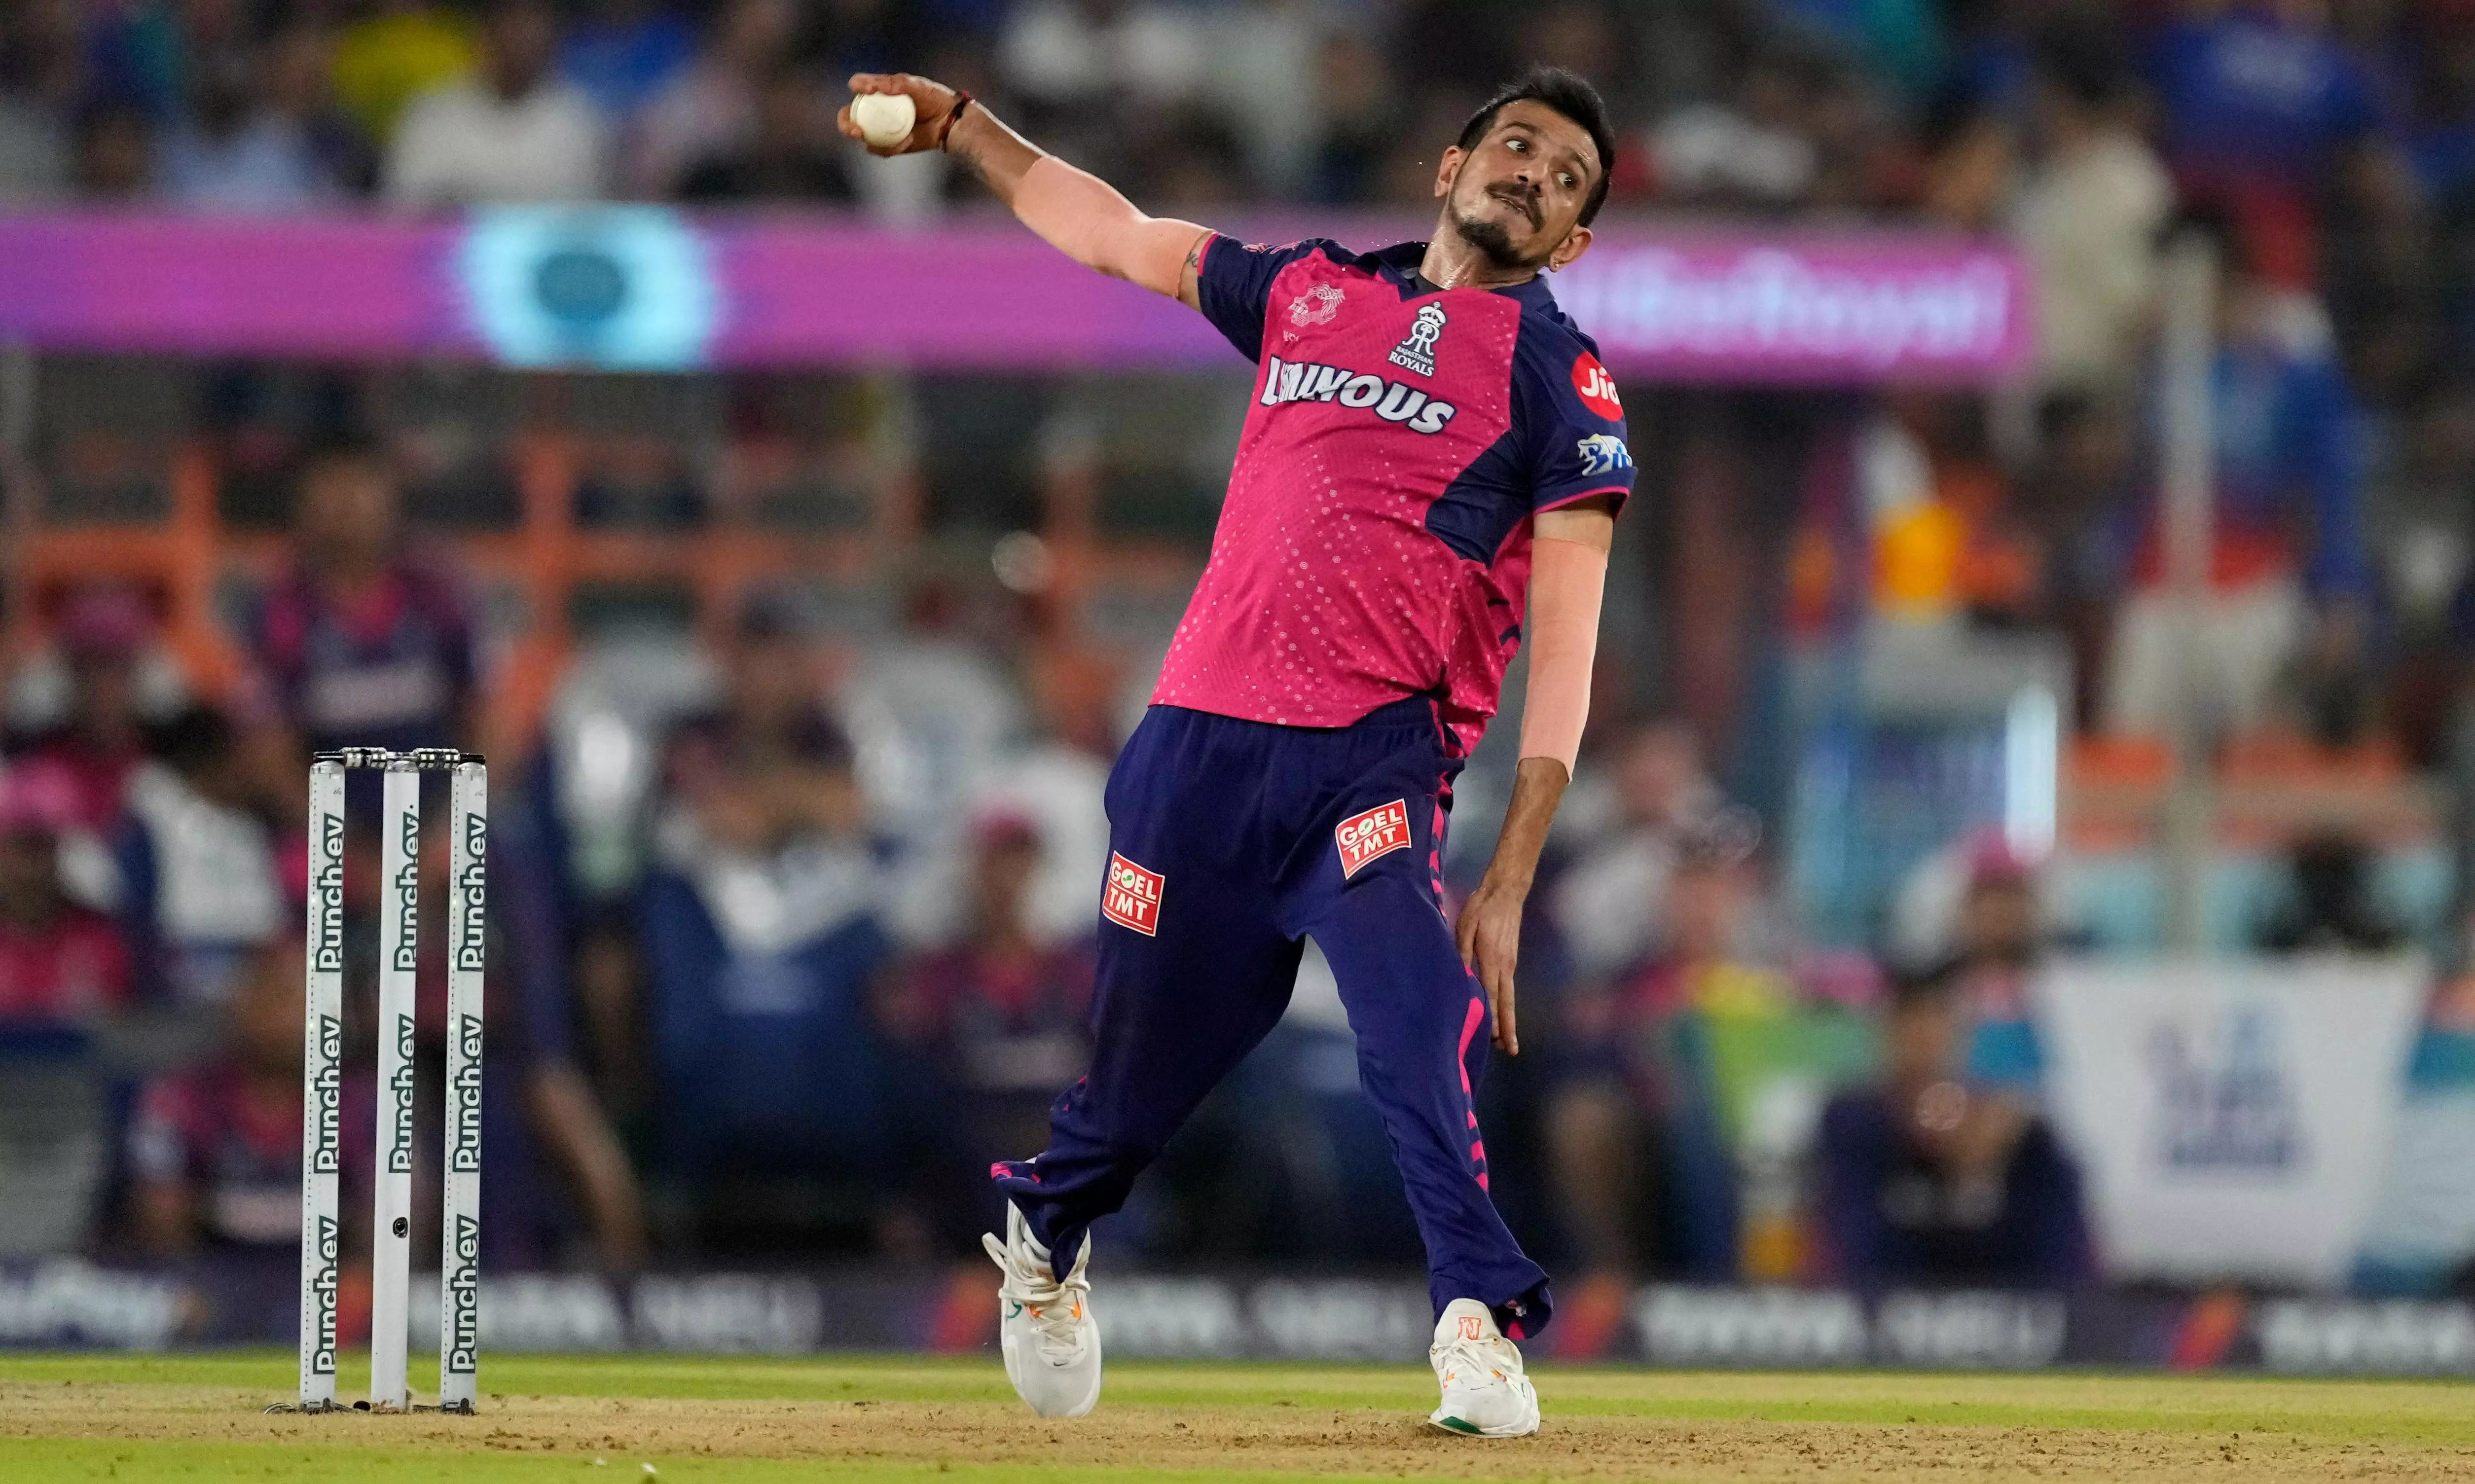 Yuzvendra Chahal tops this list in the IPL